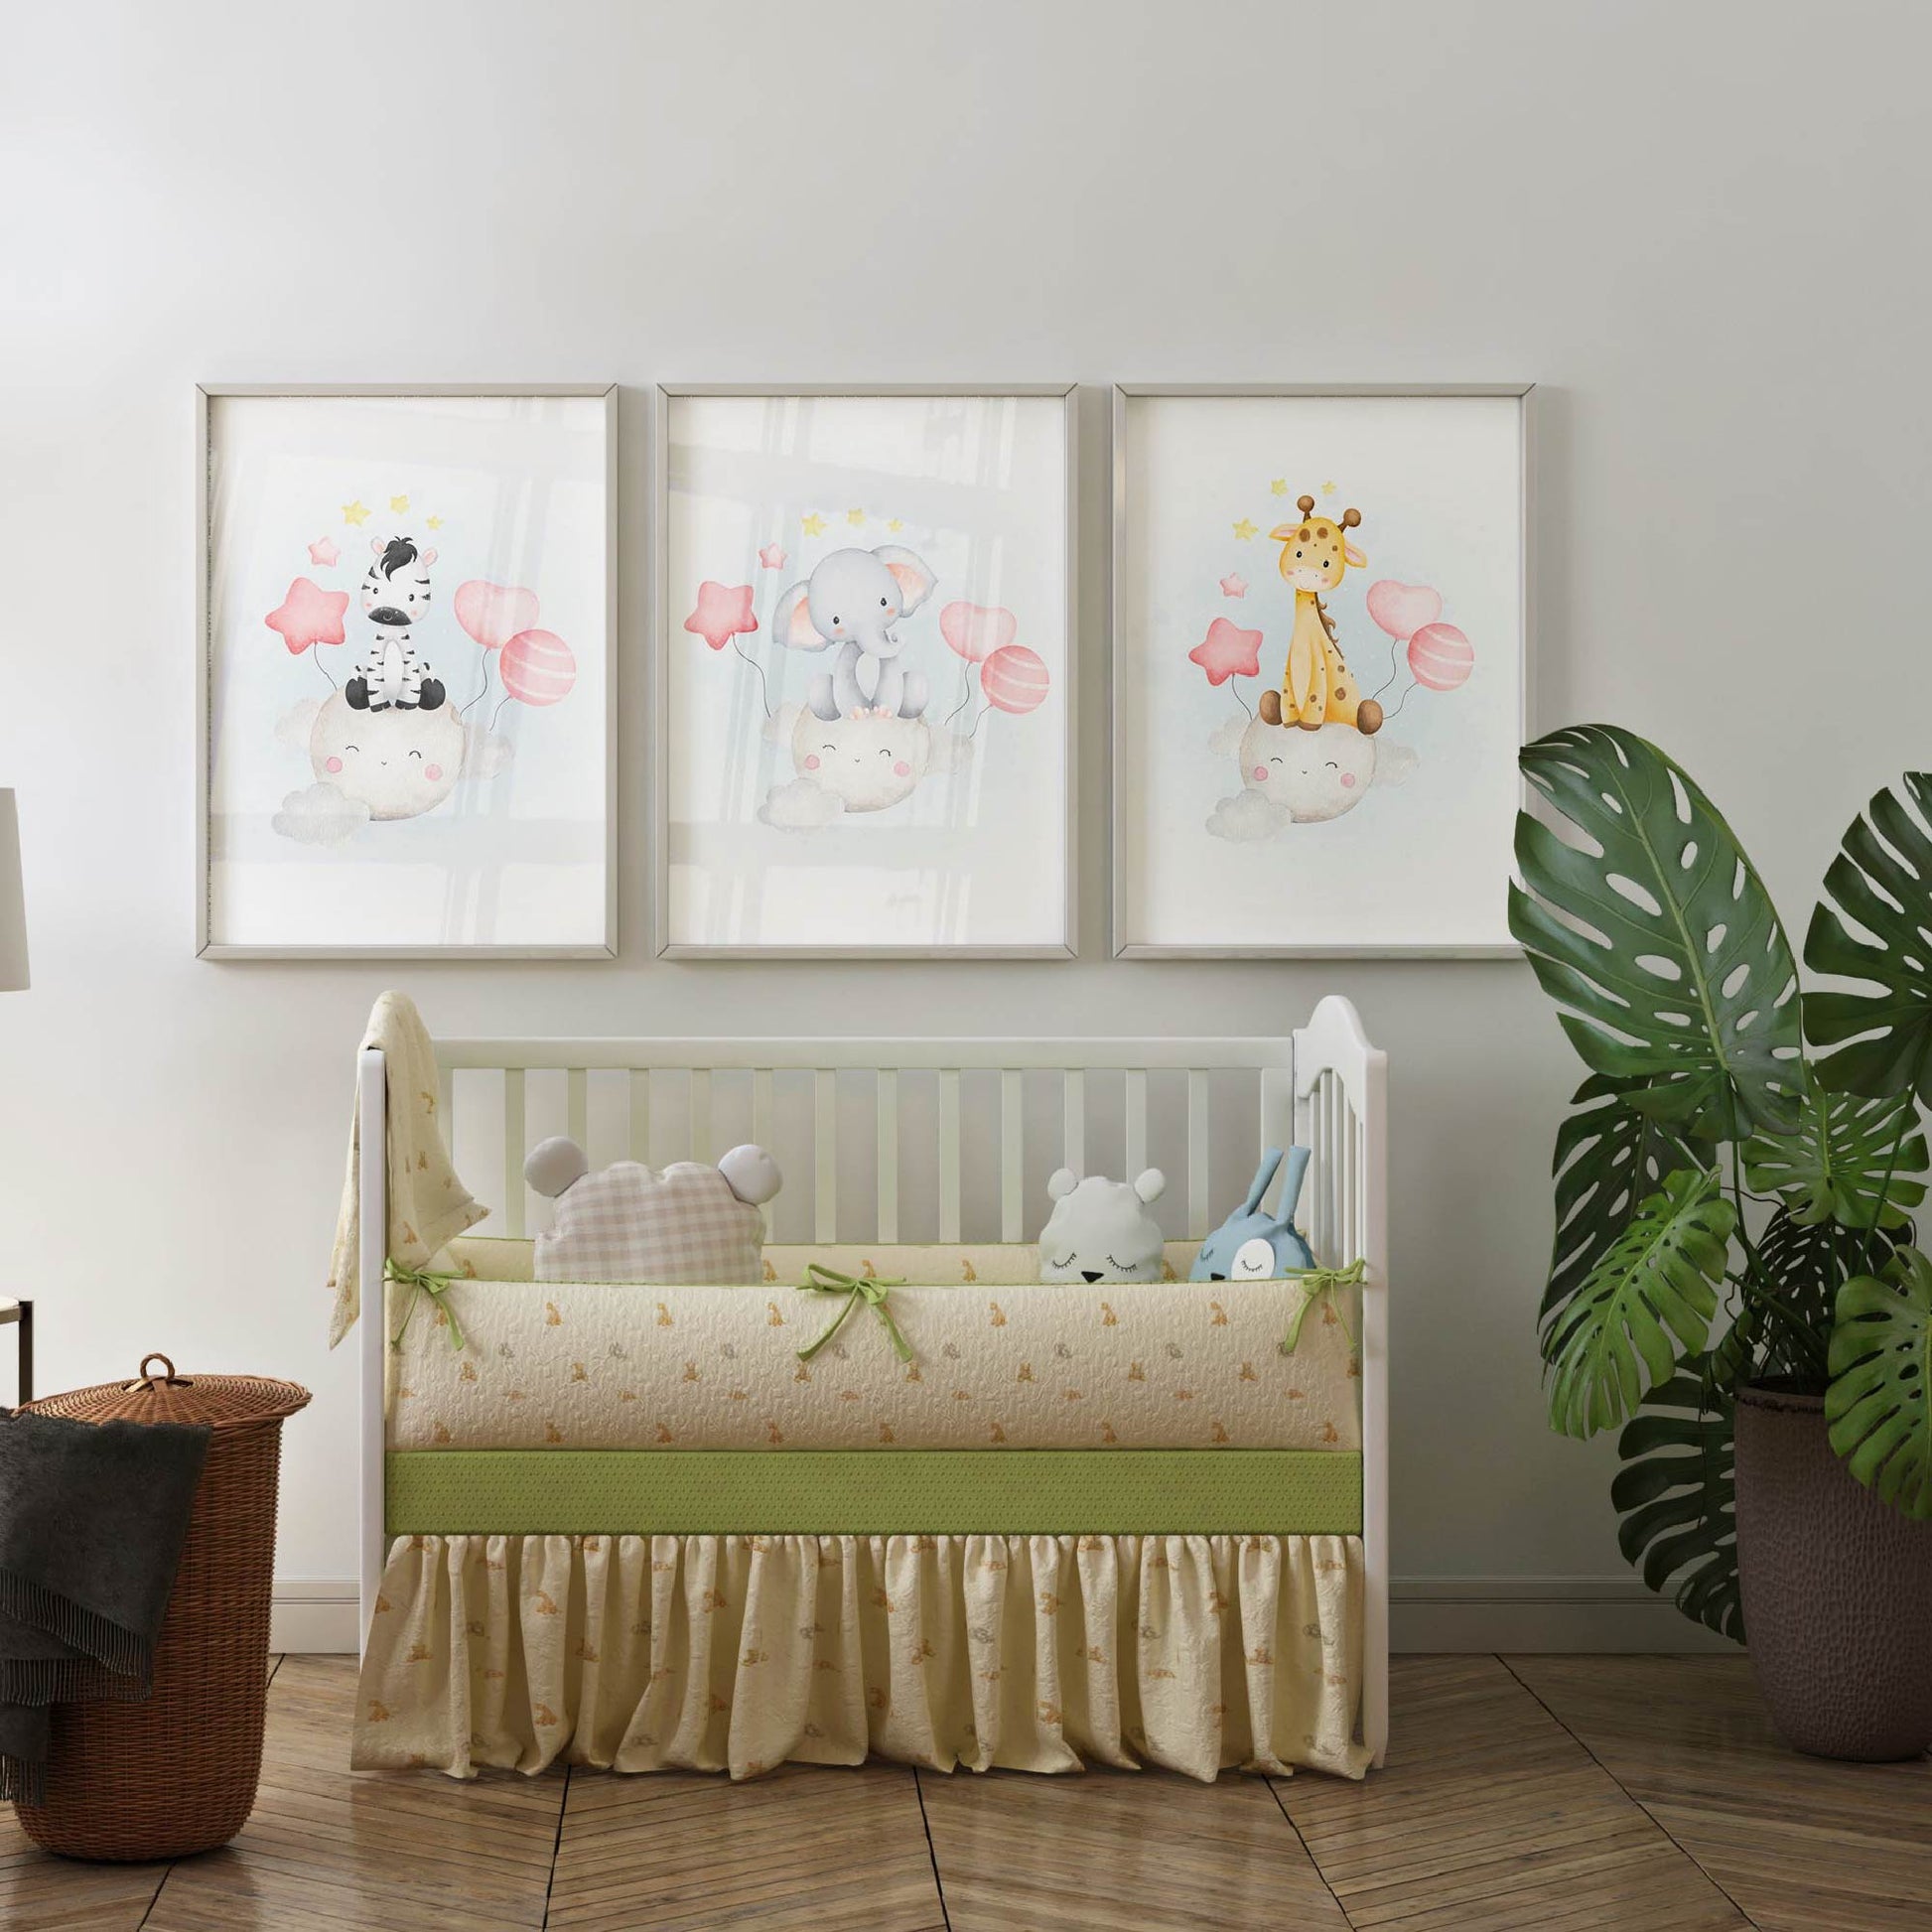 Three personalized animal-themed prints for a baby shower, framed on canvas.